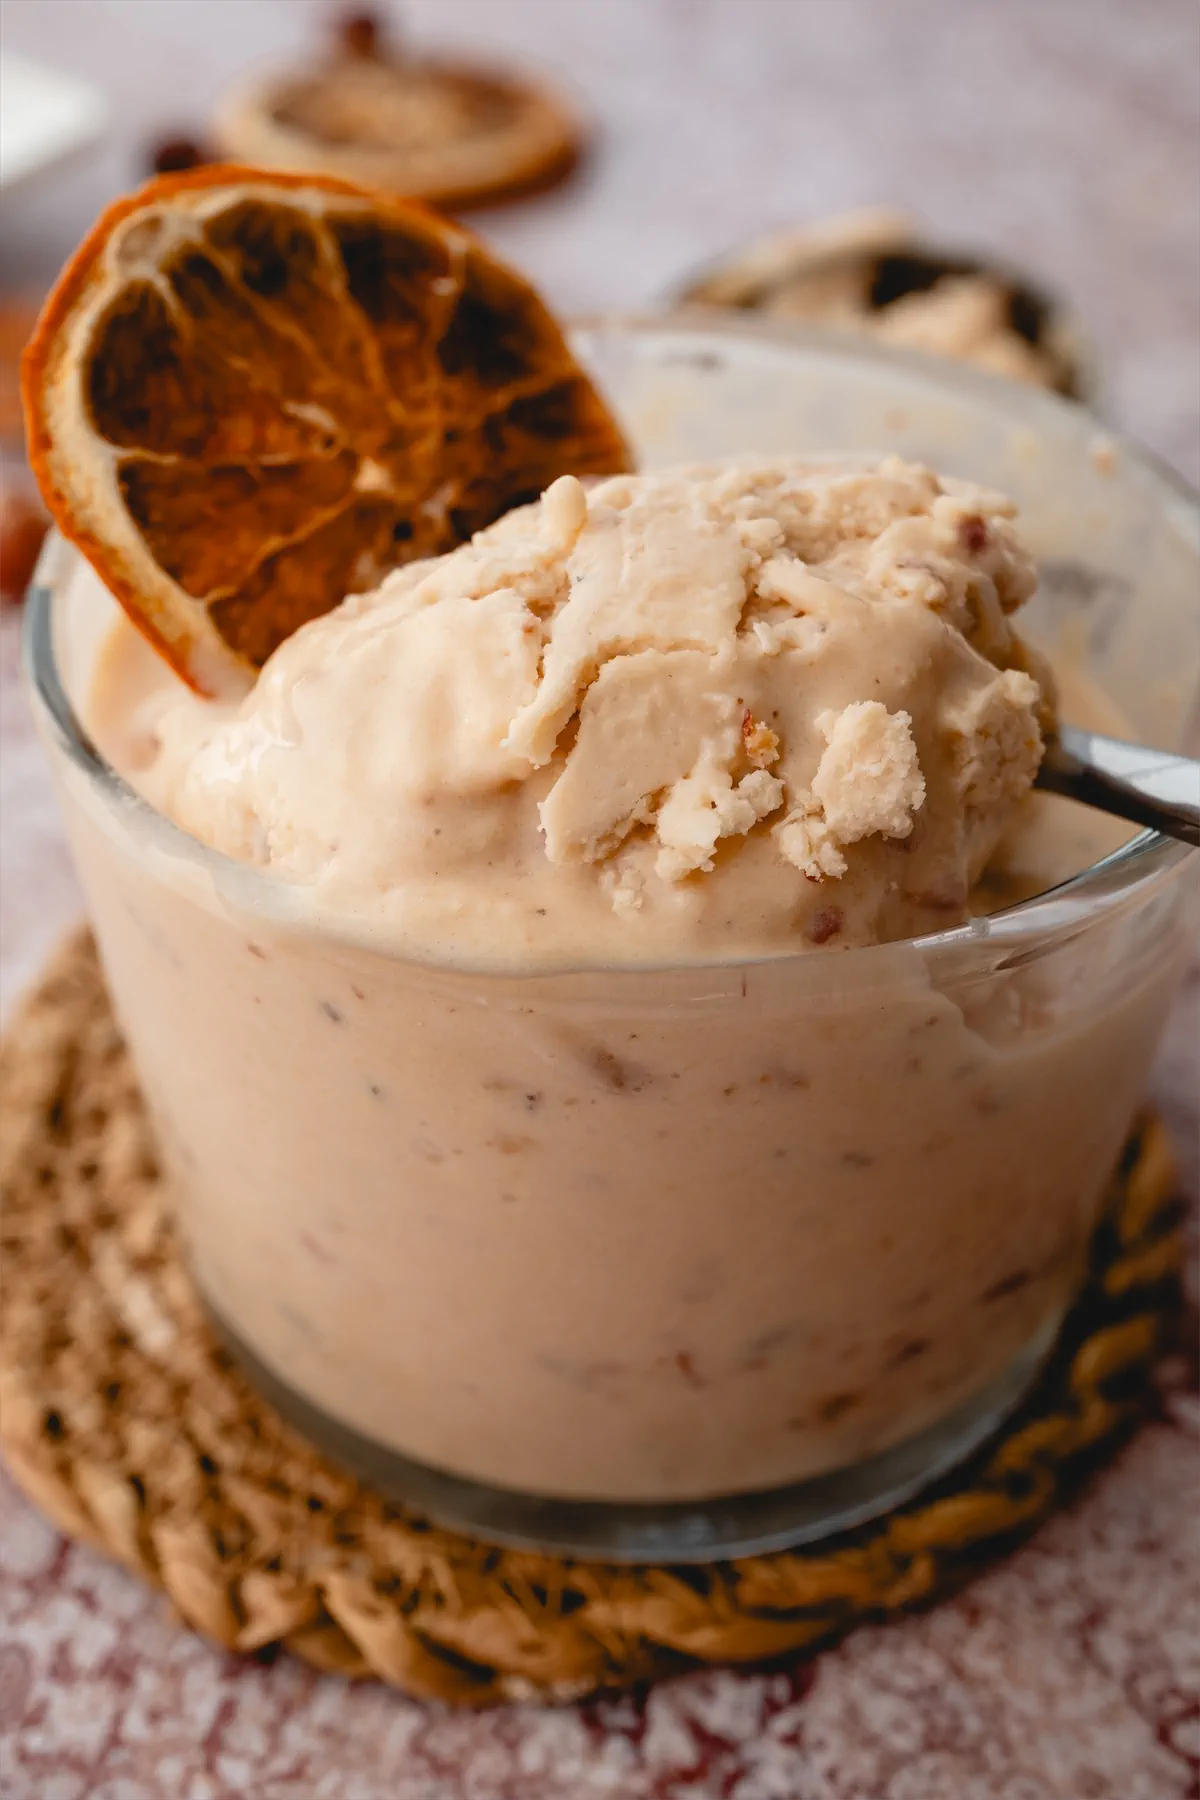 Keto butter pecan ice cream served with a slice of dried orange in a transparent glass container.